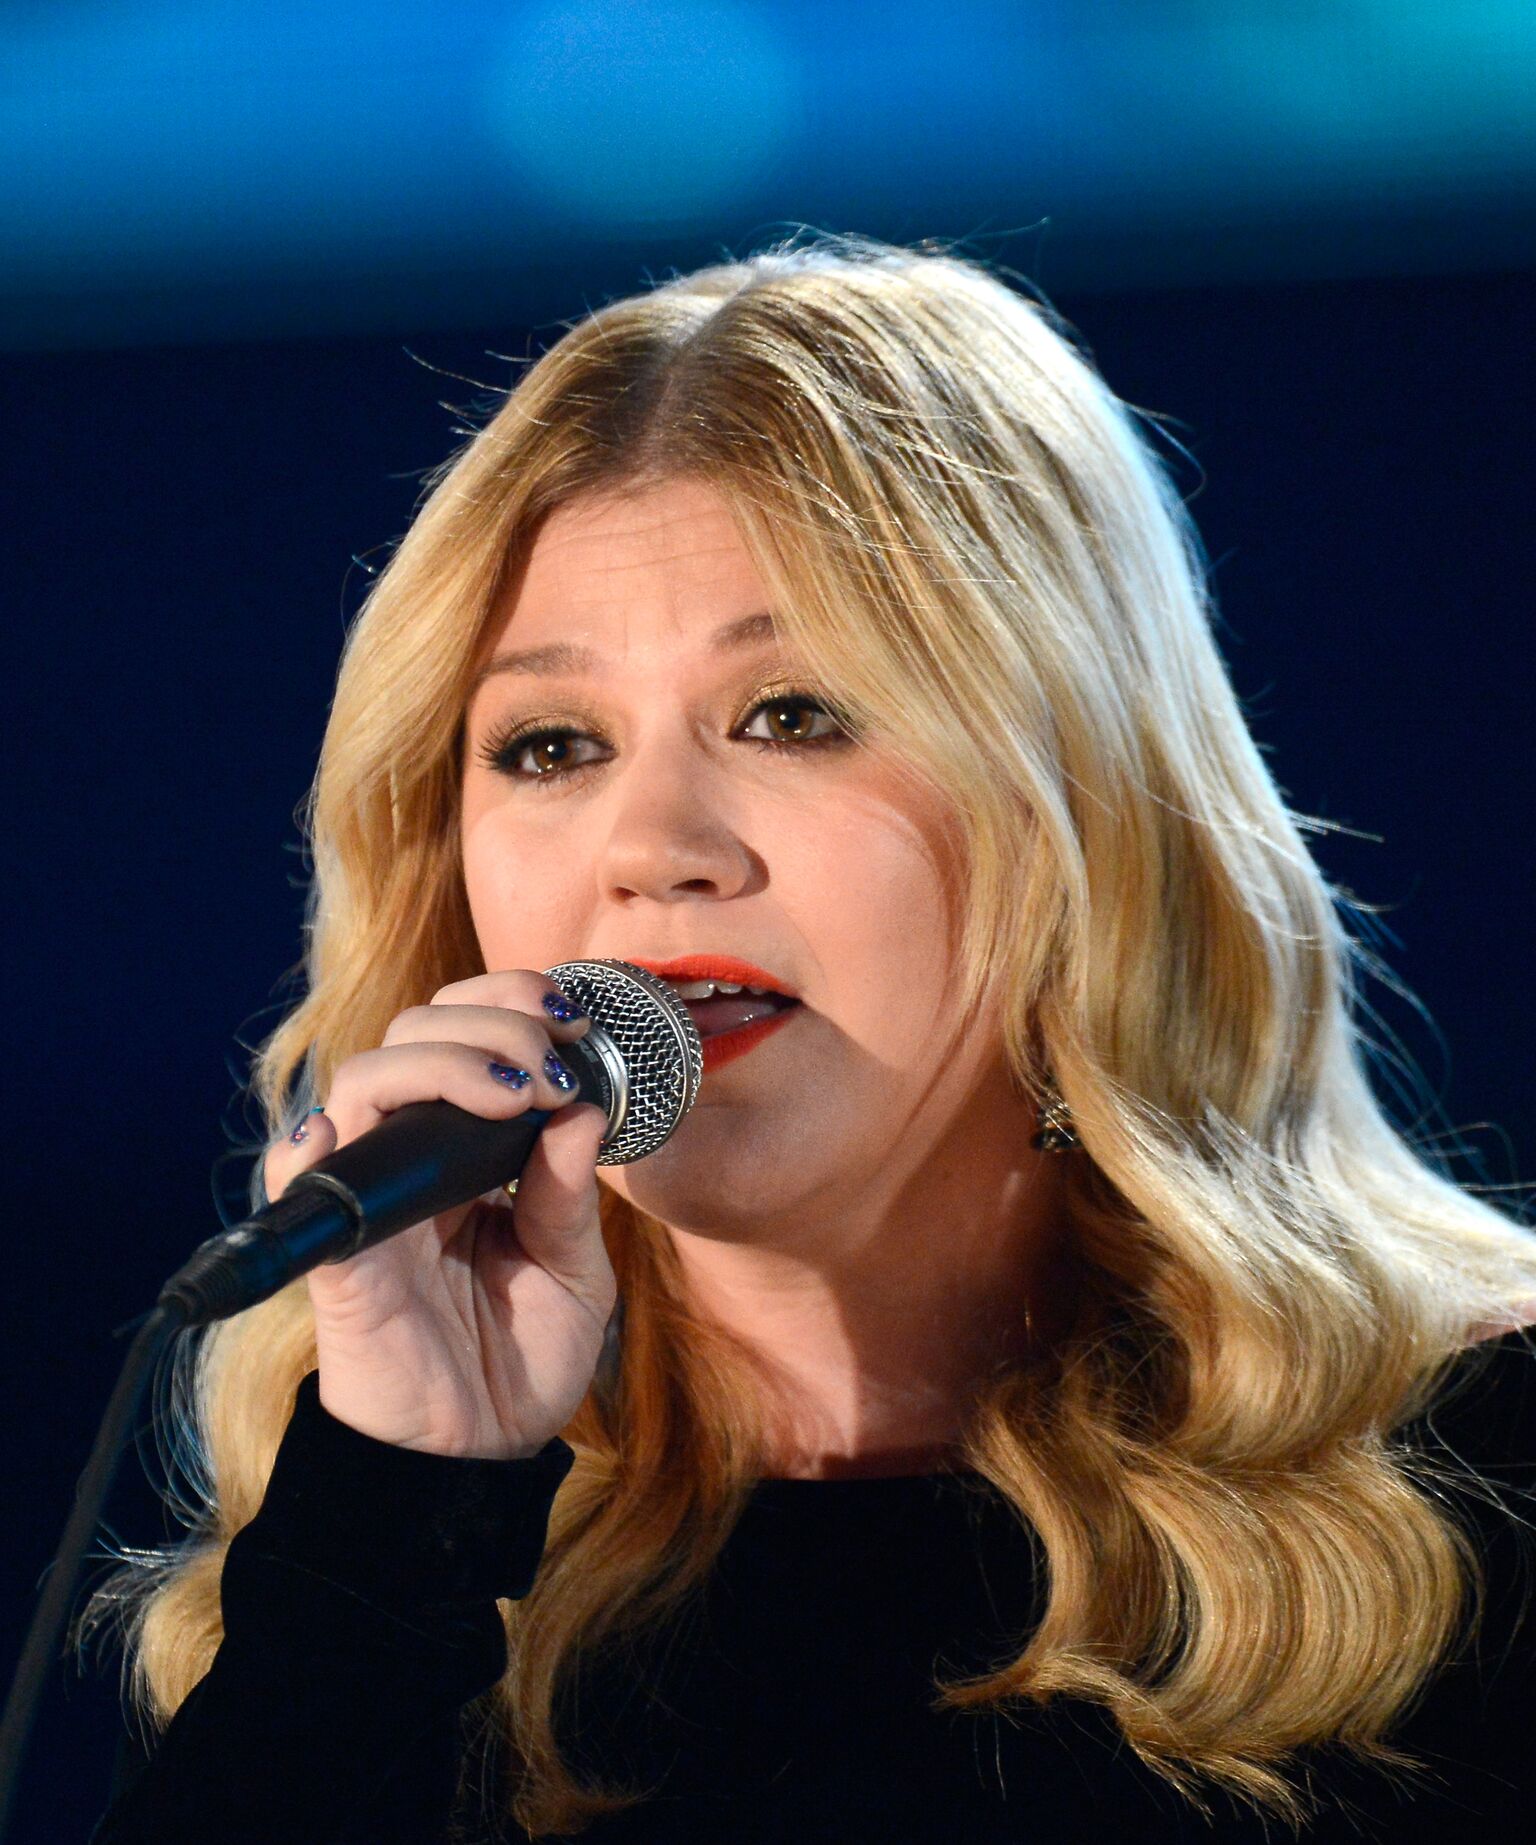 Singer Kelly Clarkson performs onstage at the 55th Annual GRAMMY Awards at Staples Center on February 10, 2013 | Photo: Getty Images